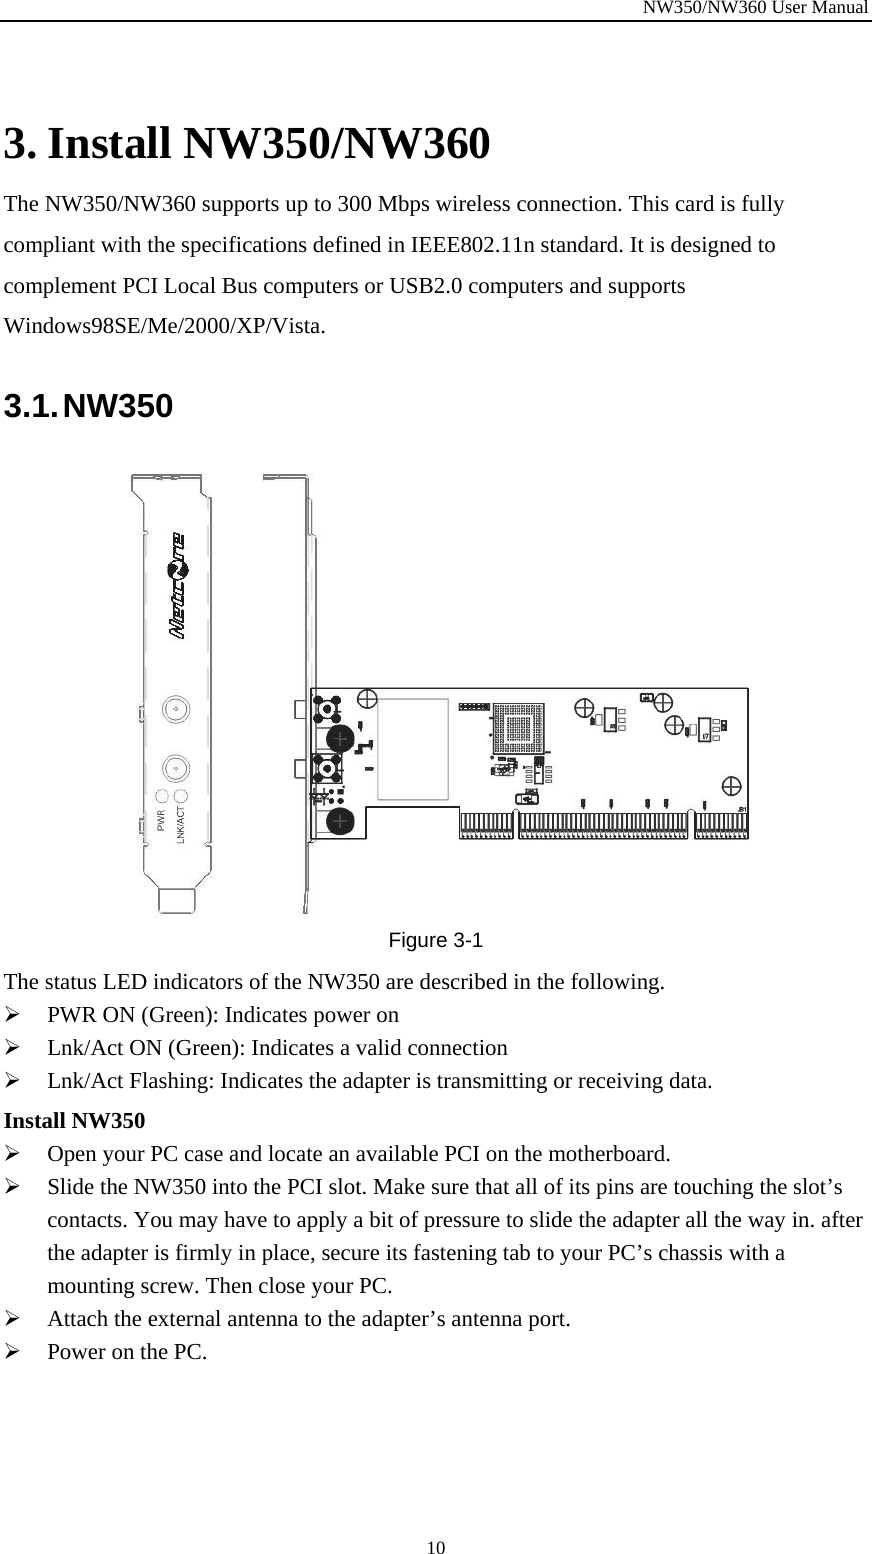 NW350/NW360 User Manual  10 3. Install NW350/NW360 The NW350/NW360 supports up to 300 Mbps wireless connection. This card is fully compliant with the specifications defined in IEEE802.11n standard. It is designed to complement PCI Local Bus computers or USB2.0 computers and supports Windows98SE/Me/2000/XP/Vista. 3.1. NW350  Figure  3-1 The status LED indicators of the NW350 are described in the following. ¾ PWR ON (Green): Indicates power on ¾ Lnk/Act ON (Green): Indicates a valid connection   ¾ Lnk/Act Flashing: Indicates the adapter is transmitting or receiving data. Install NW350 ¾ Open your PC case and locate an available PCI on the motherboard. ¾ Slide the NW350 into the PCI slot. Make sure that all of its pins are touching the slot’s contacts. You may have to apply a bit of pressure to slide the adapter all the way in. after the adapter is firmly in place, secure its fastening tab to your PC’s chassis with a mounting screw. Then close your PC. ¾ Attach the external antenna to the adapter’s antenna port. ¾ Power on the PC. 